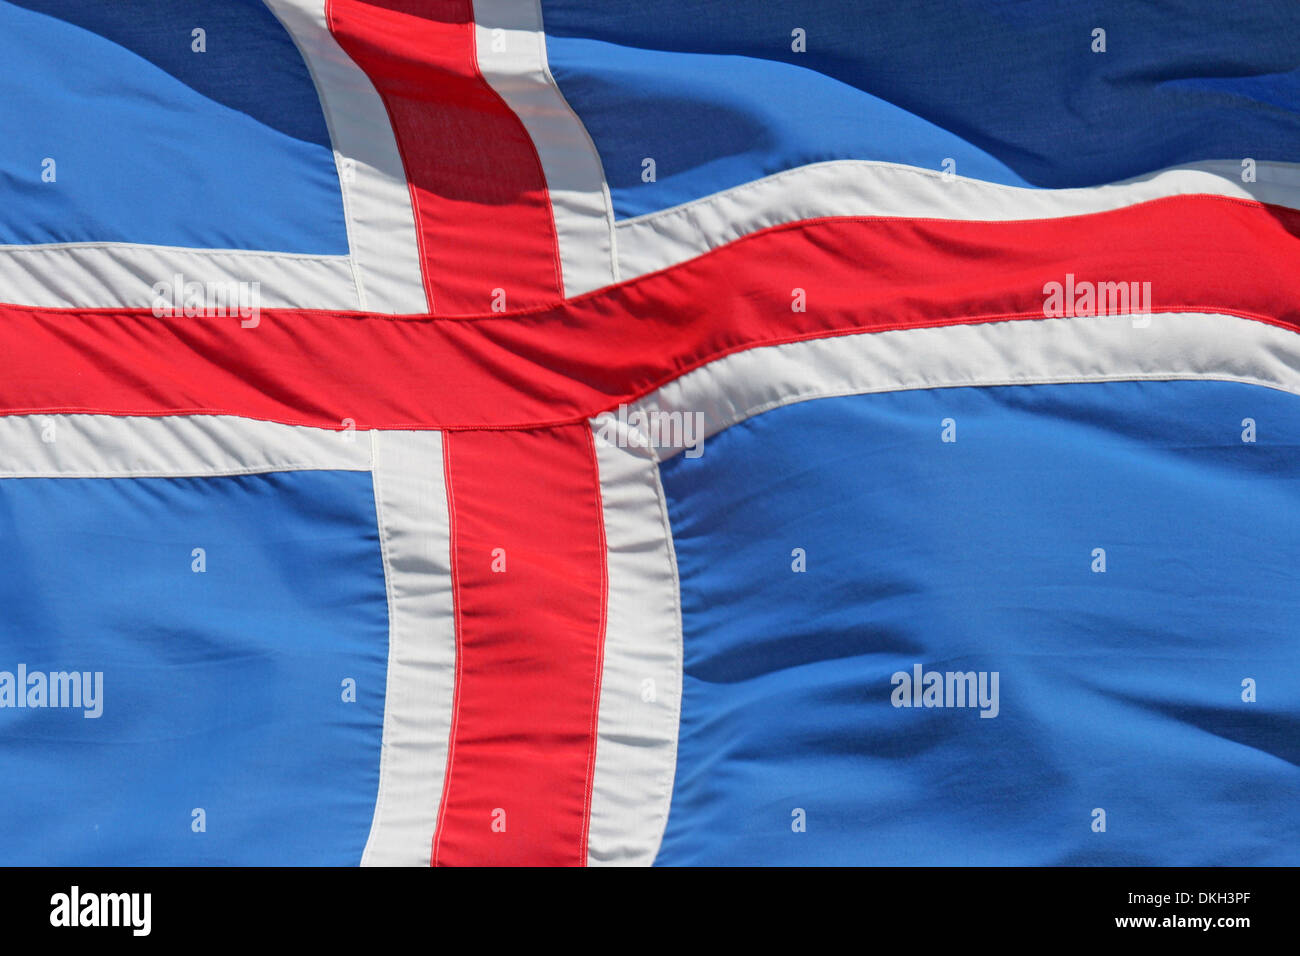 Close up of the National flag of Iceland in Scandinavia, Europe. With a red & white cross over a blue background. Stock Photo